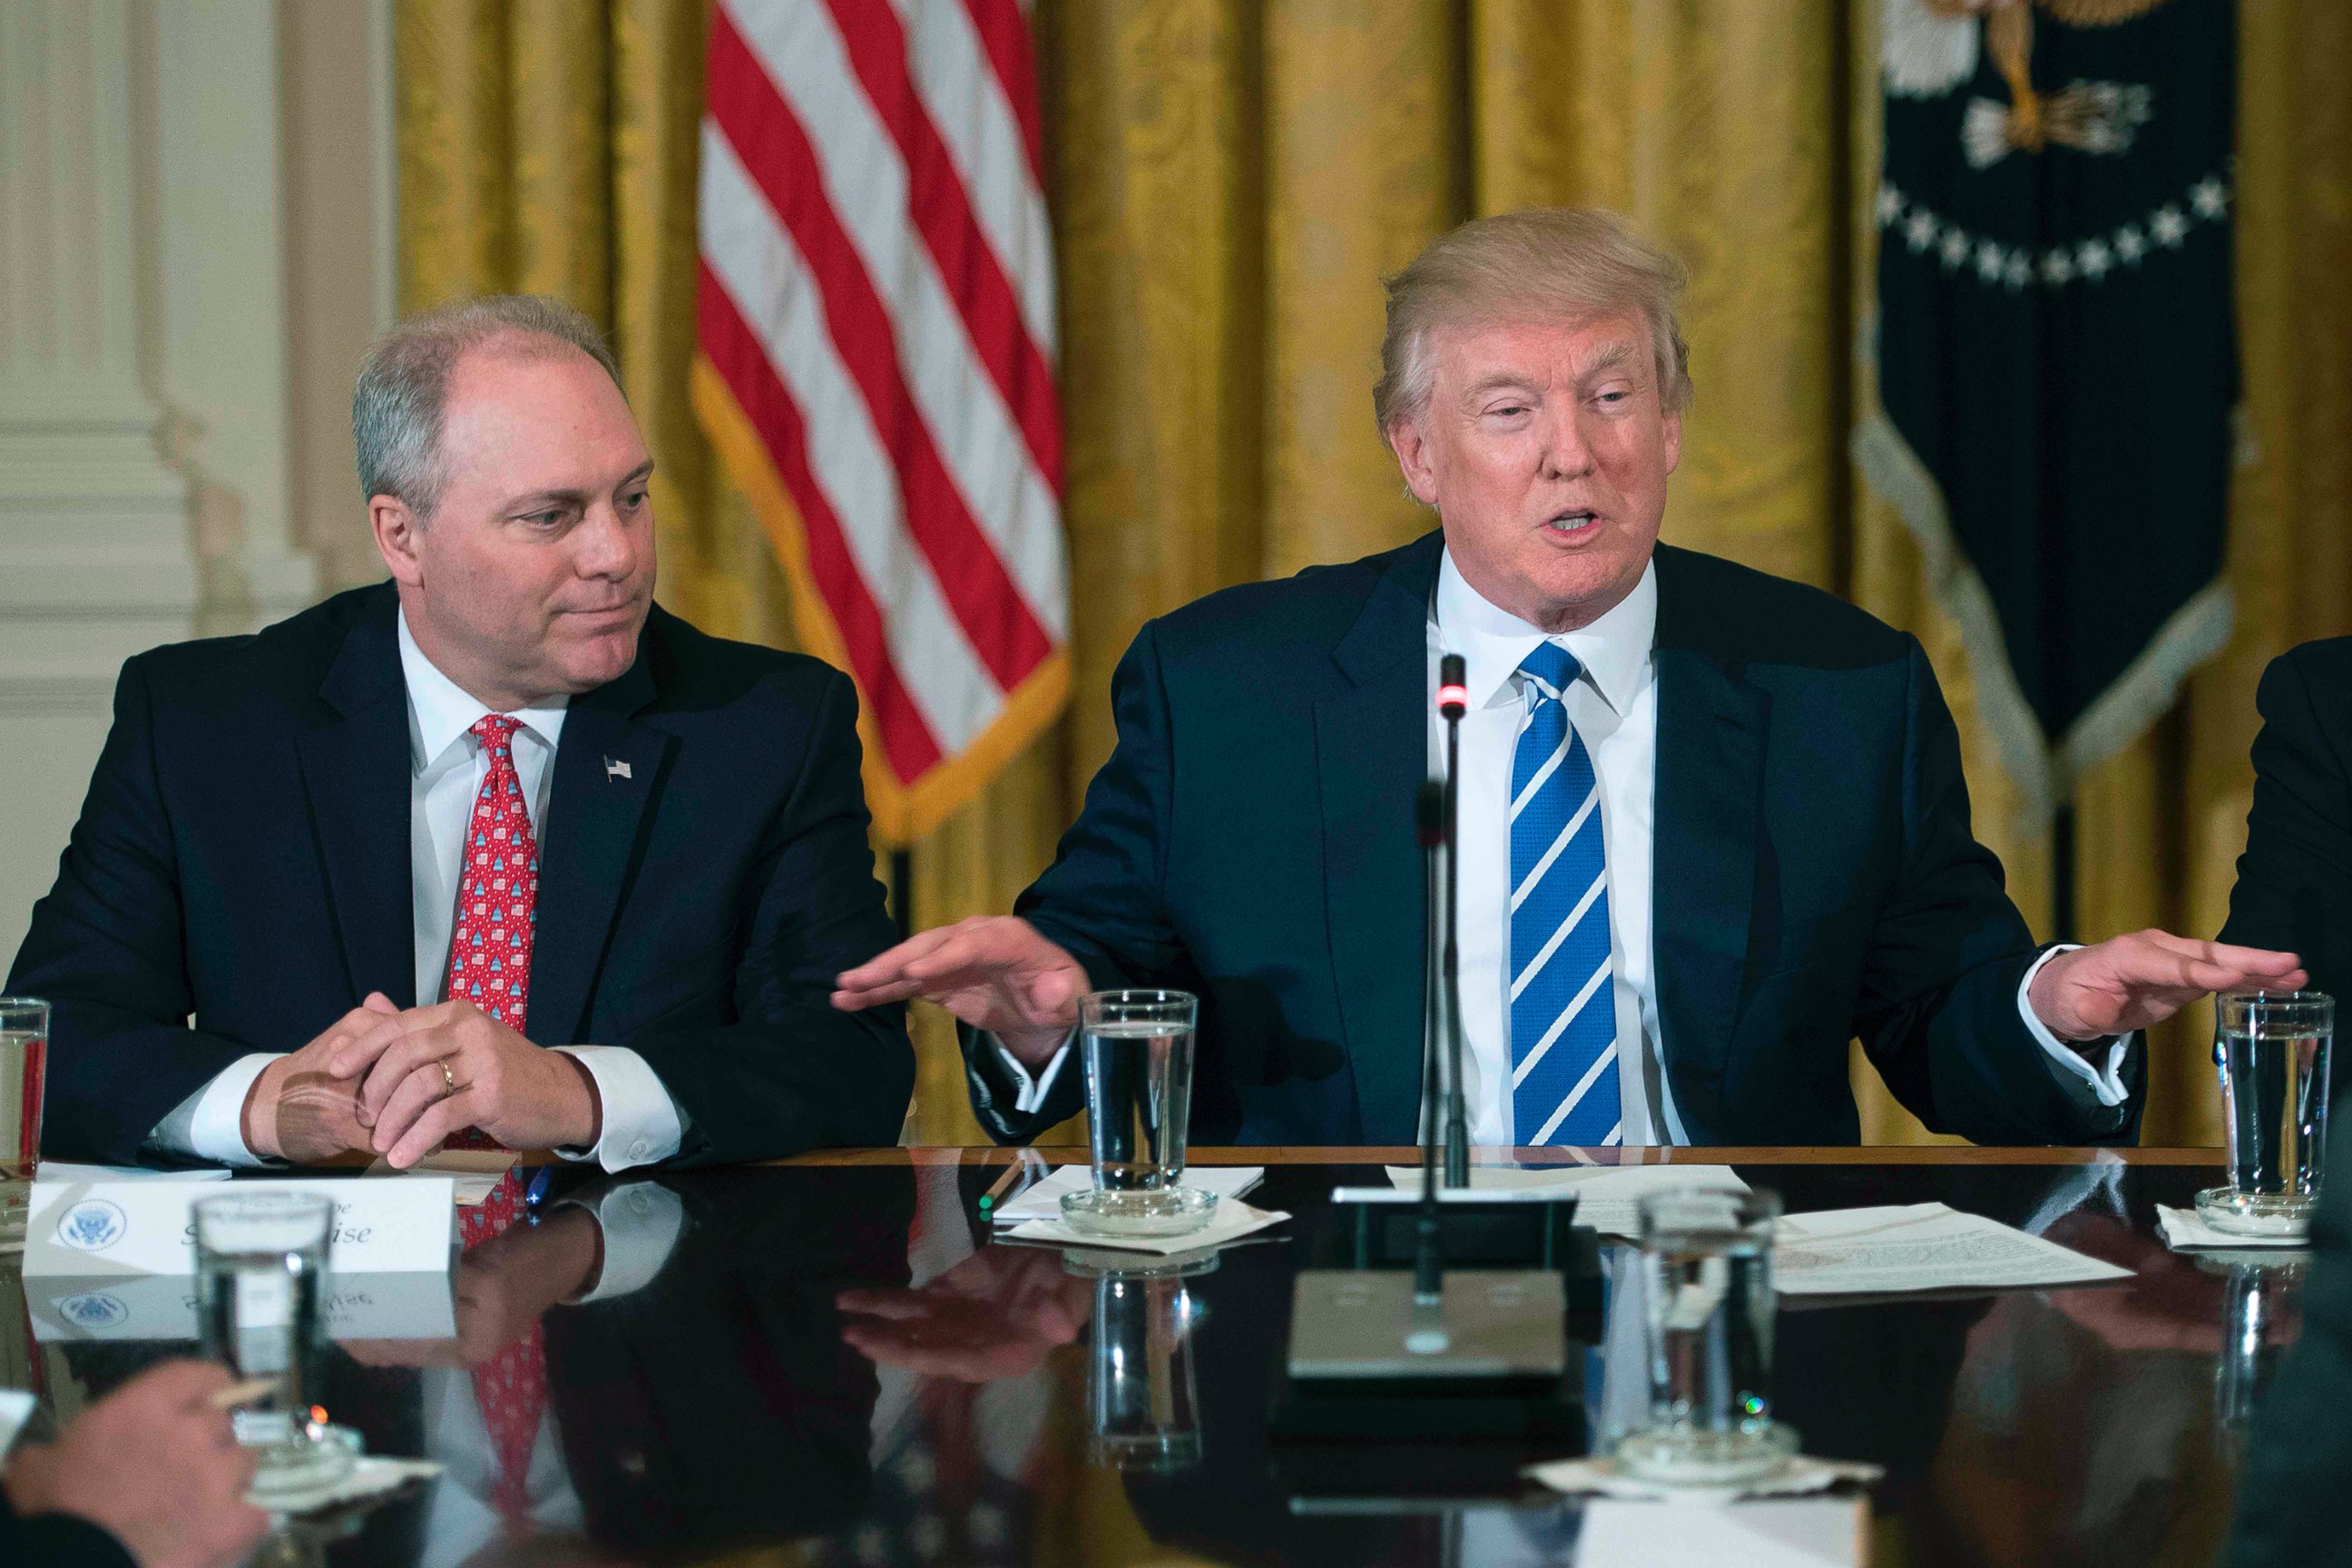 PHOTO: Rep. Steve Scalise during a March 7, 2017 meeting with President Donald Trump at the White House in Washington, D.C.